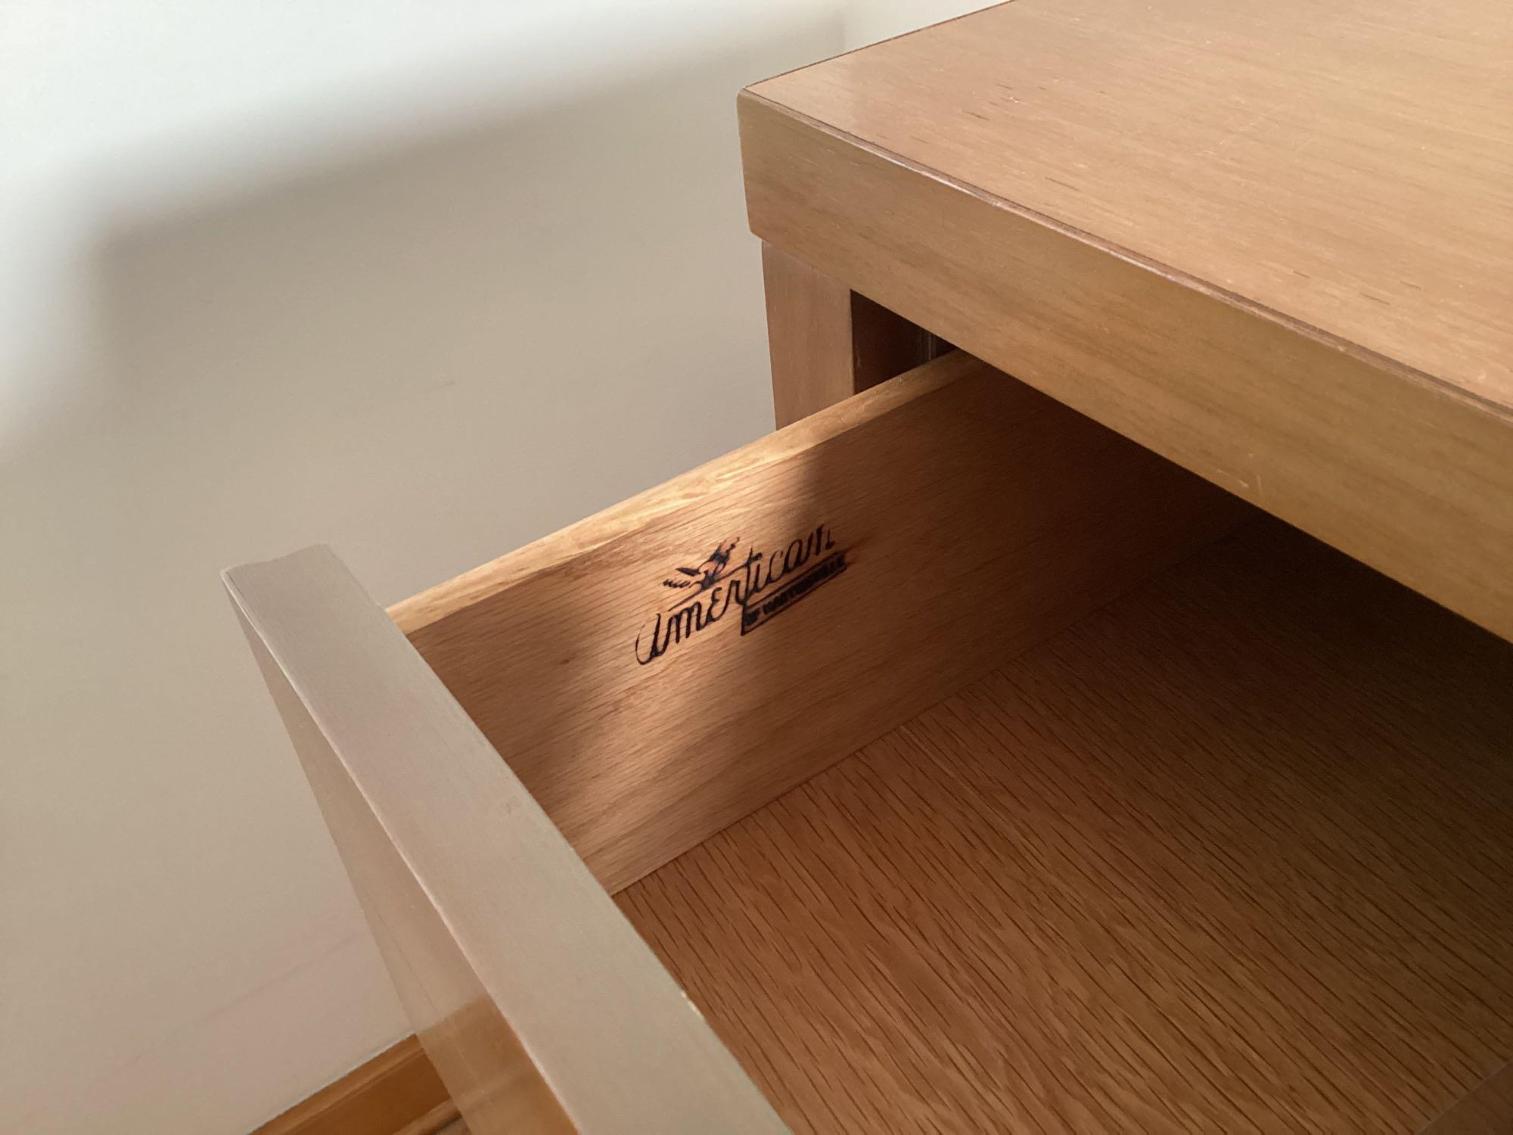 Image for MCM Chest of Drawers